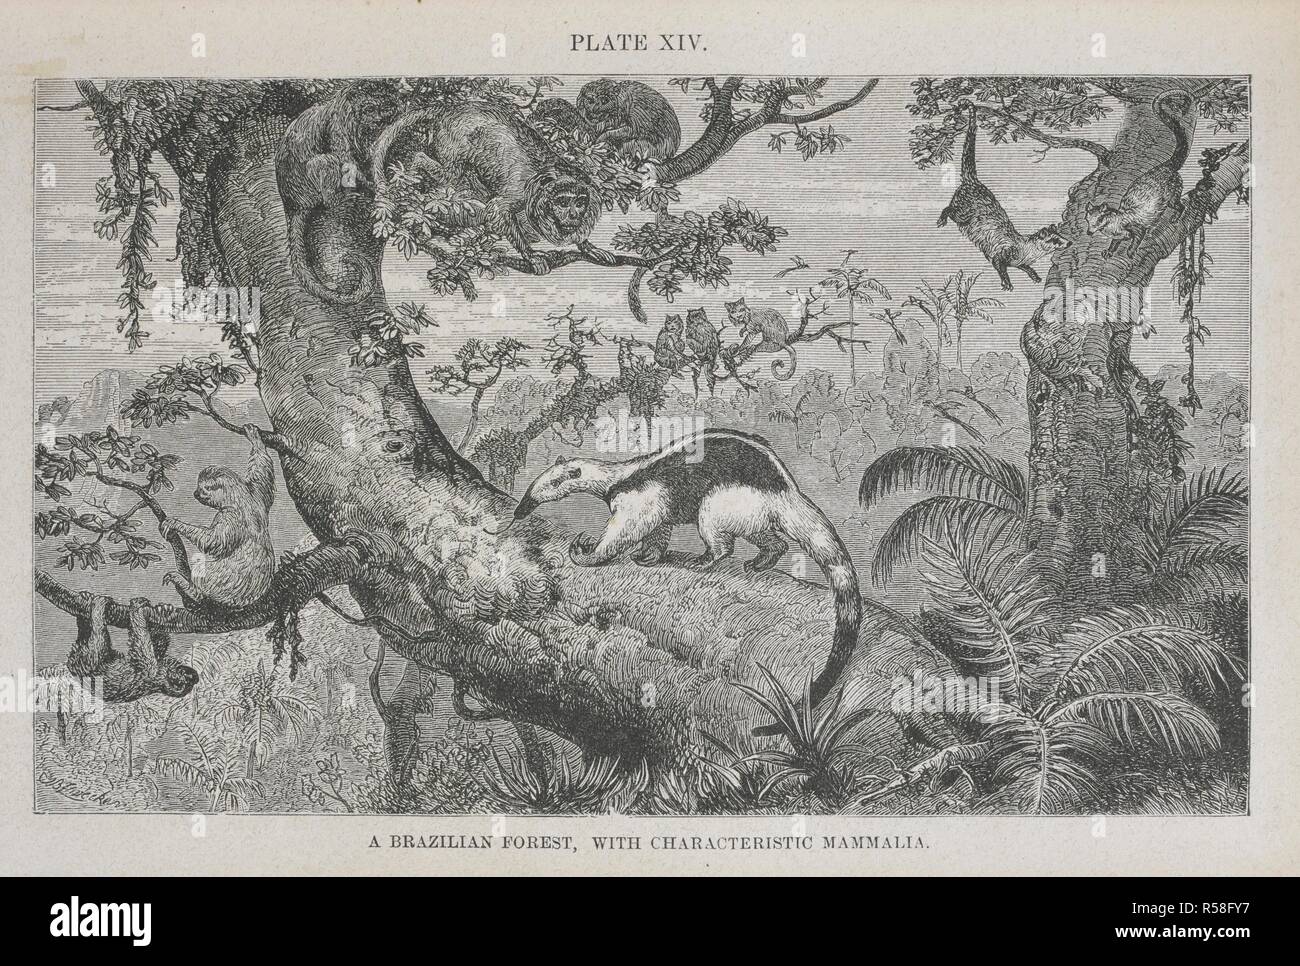 A Brazilian forest, with characteristic mammalia. The Geographical Distribution of Animals, with a study of the relations of living and extinct faunas as elucidating the past changes of the earth's surface. ... . London, 1876. Source: 07209.dd.1 plate XIV. Author: WALLACE, ALFRED RUSSEL. Stock Photo